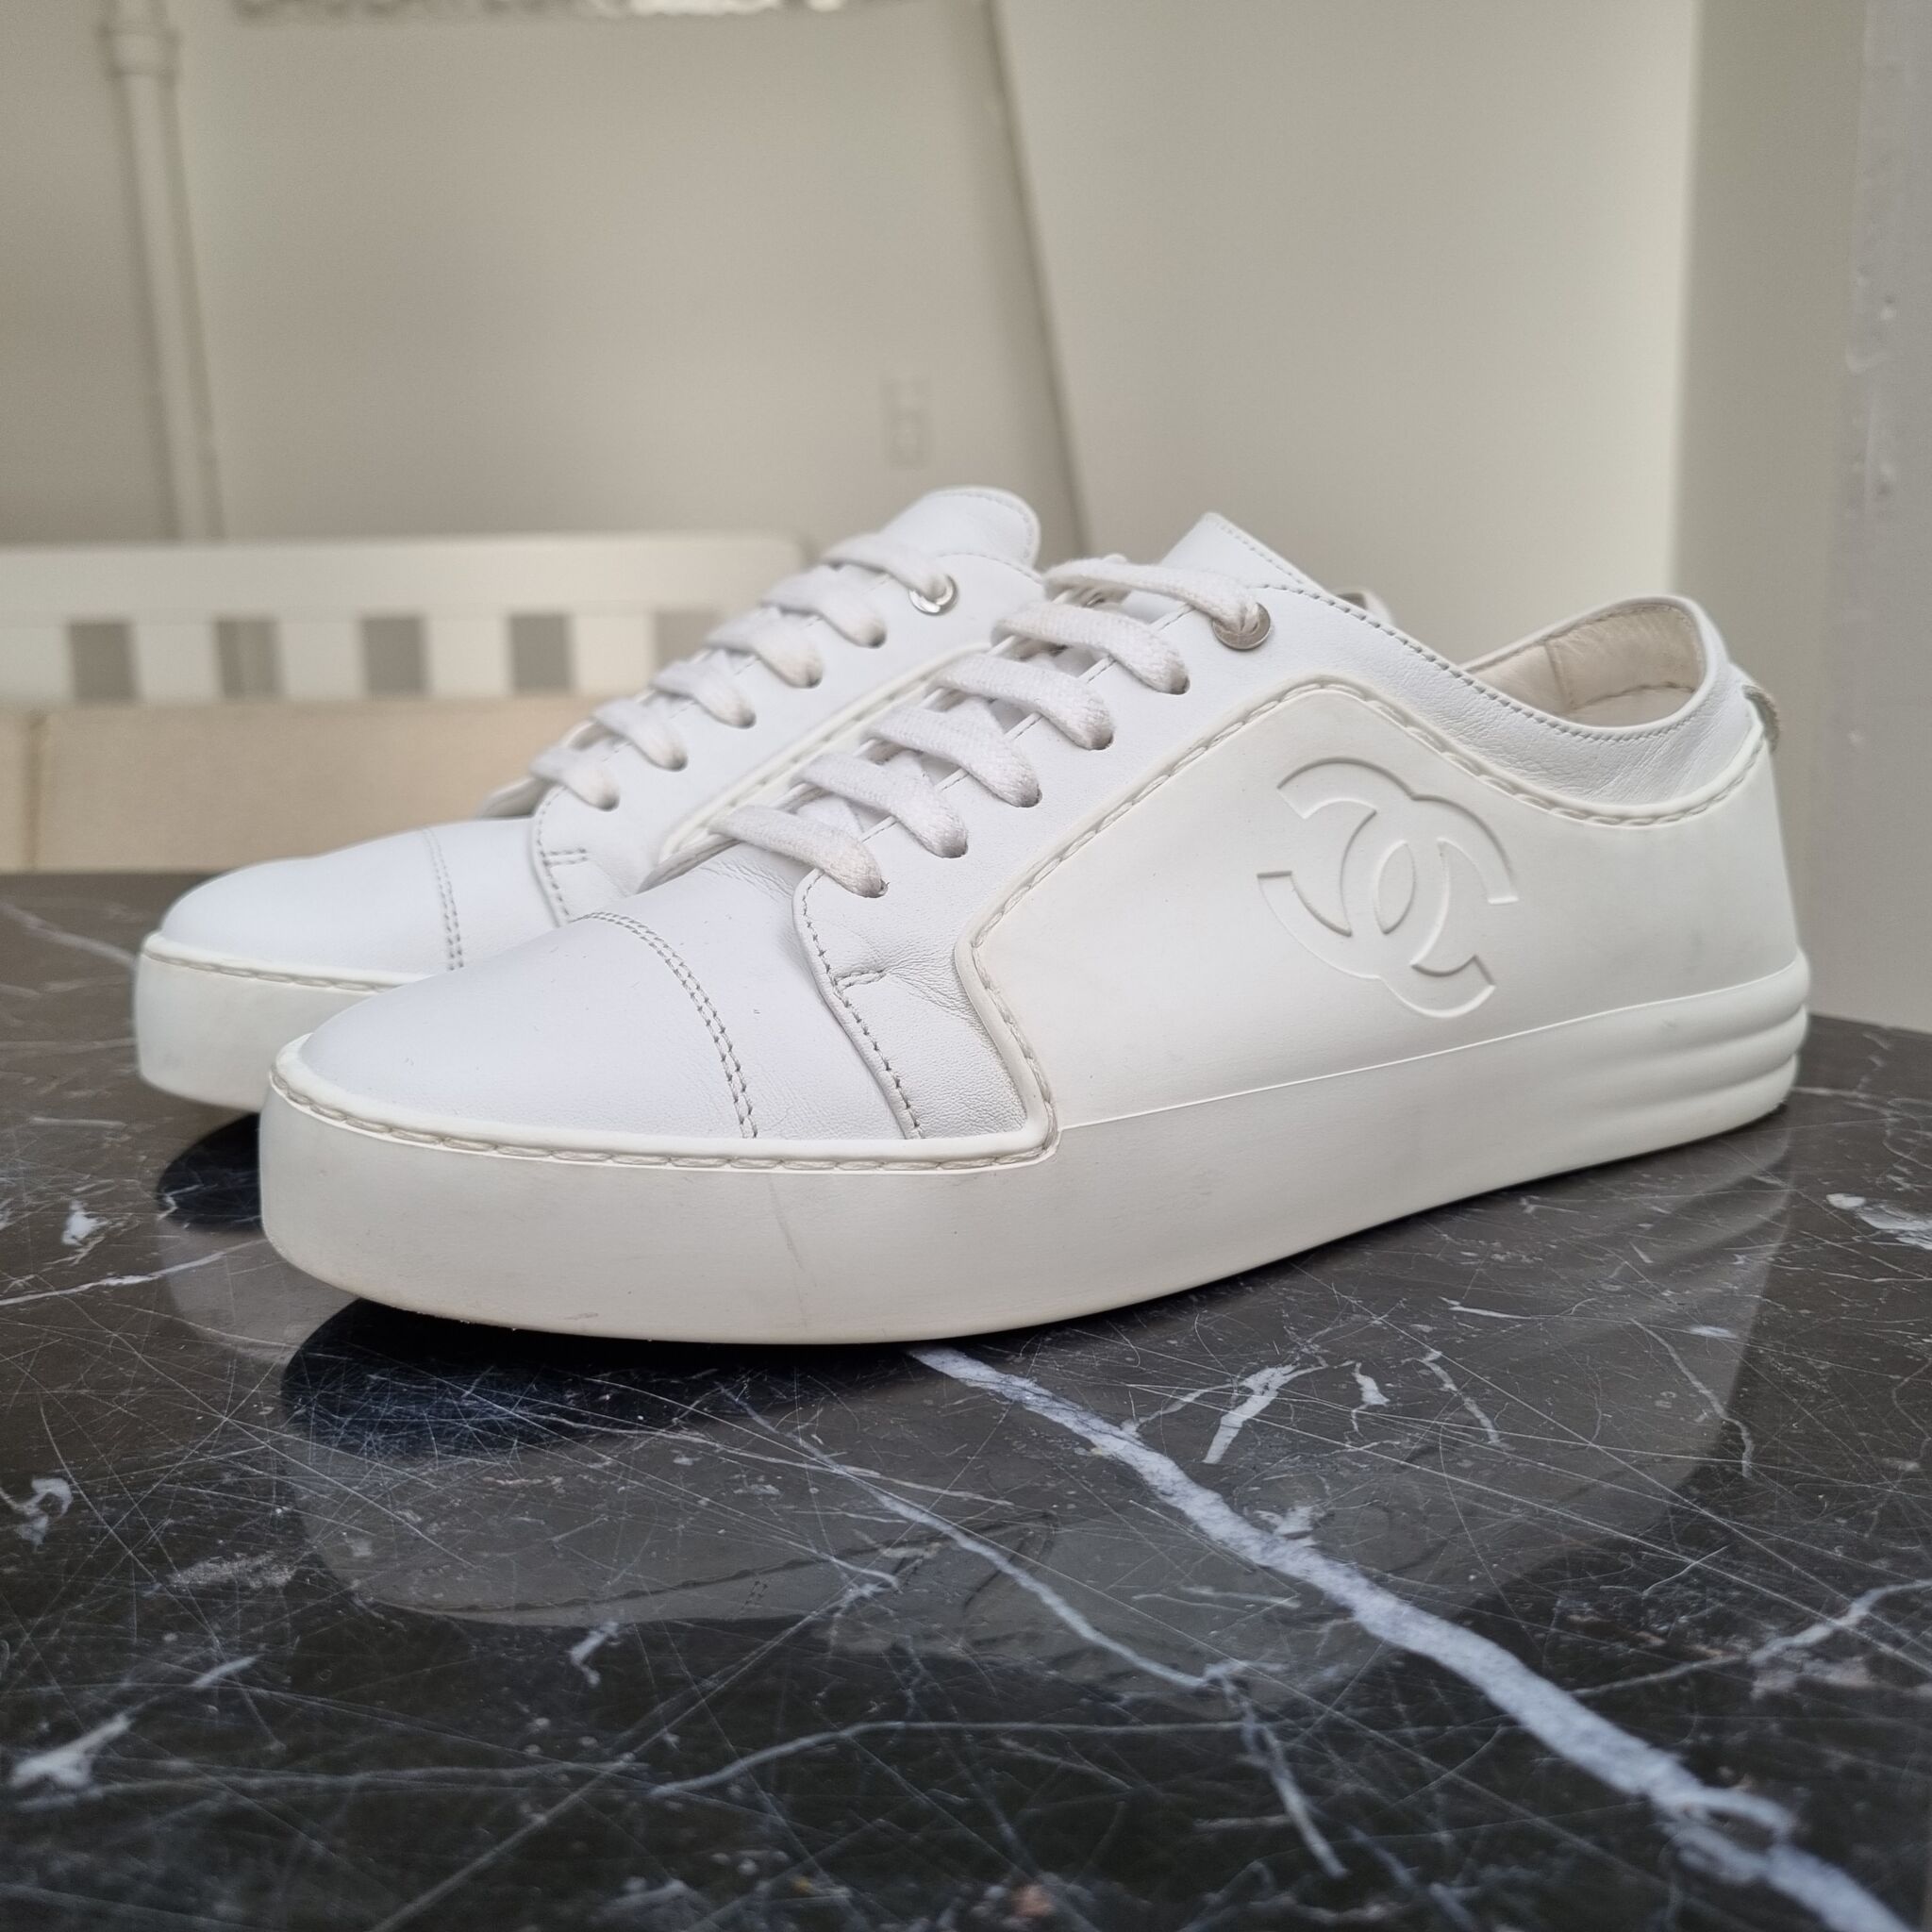 Chanel Low Top Trainer Reflective White Suede  G34360 Y53536 0I259  US